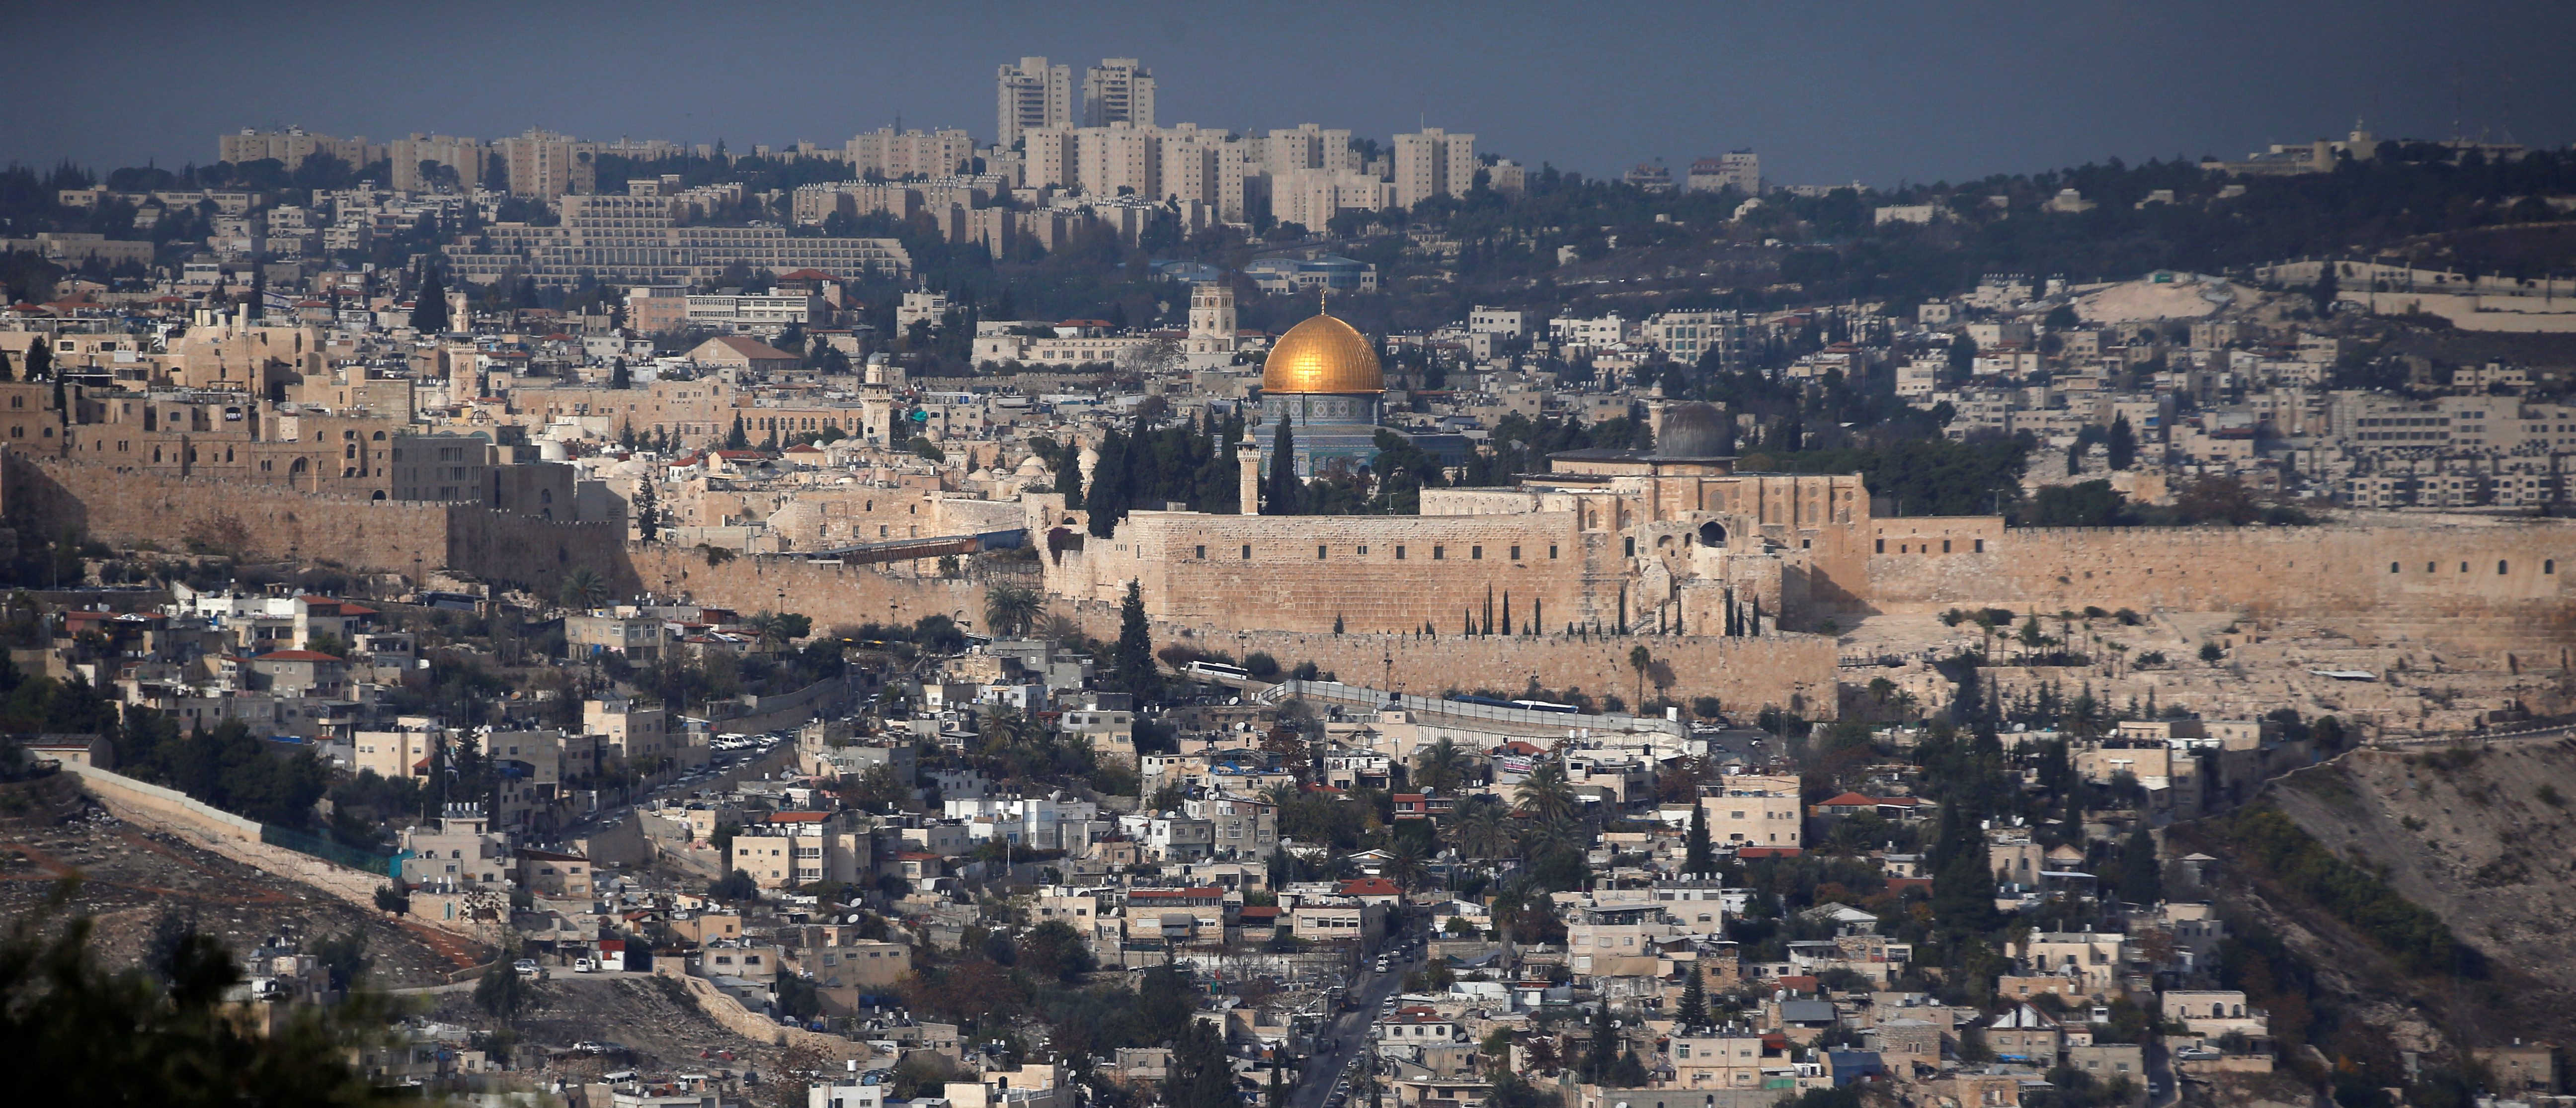 Jerusalem, with the iconic gold dome of the al-Aqsa mosque in the center. Img from Brookings Institution.